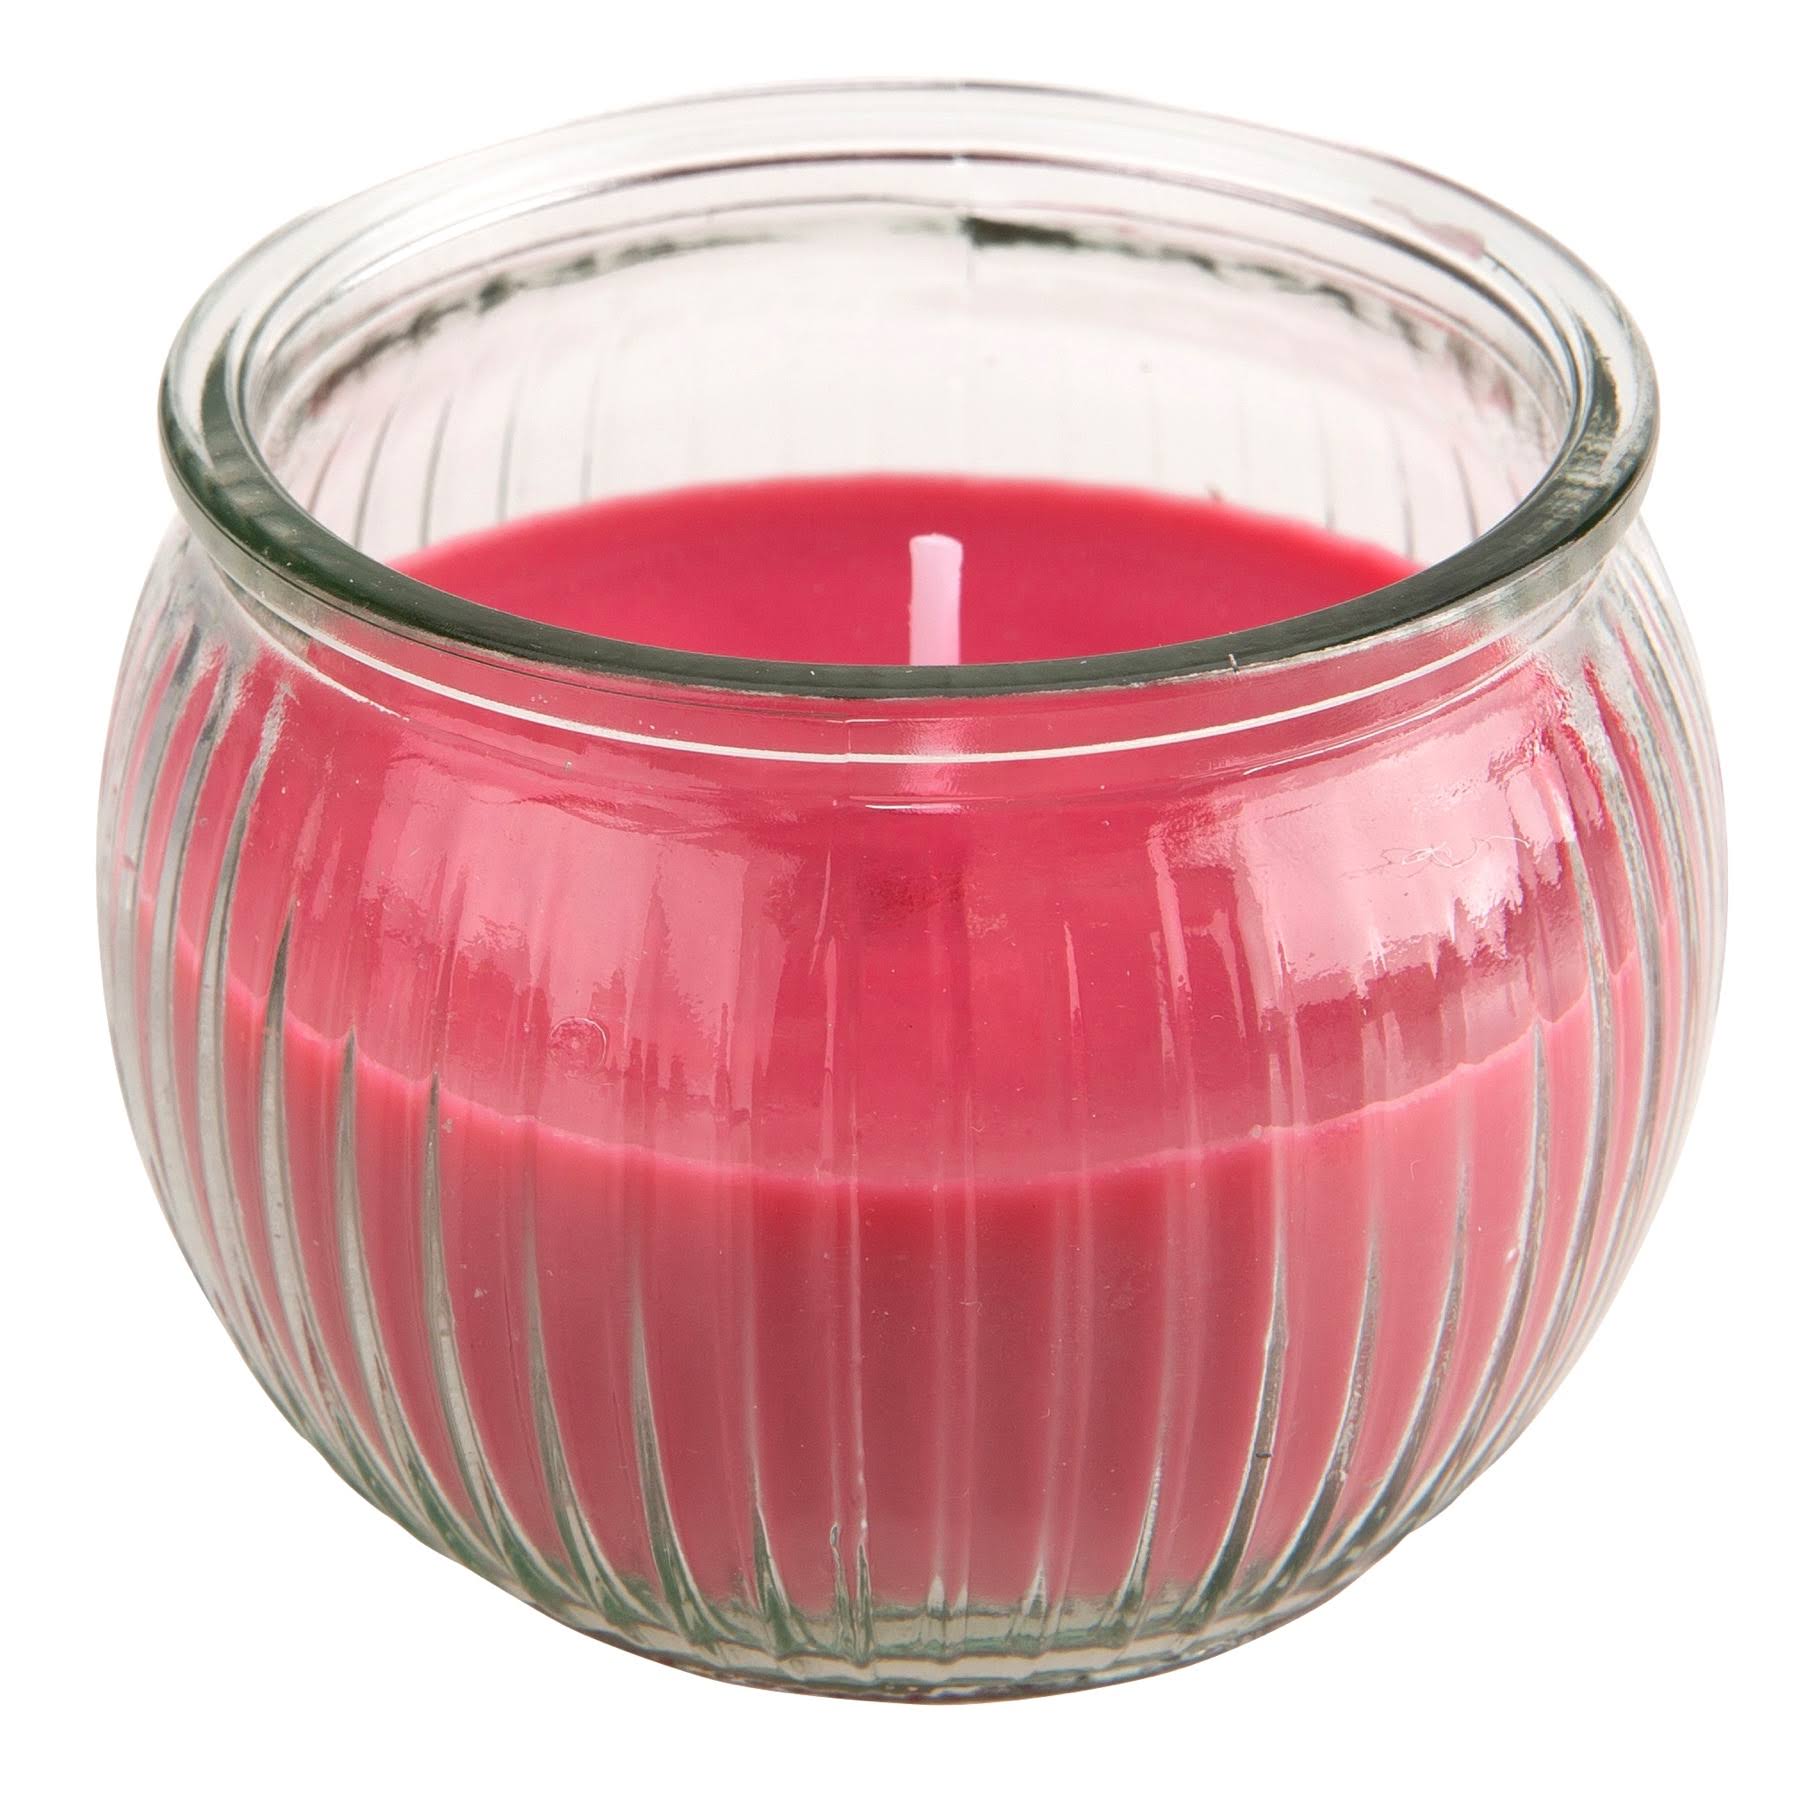 Starlytes Luxury Scented Candle - Apple Cinnamon, 85g